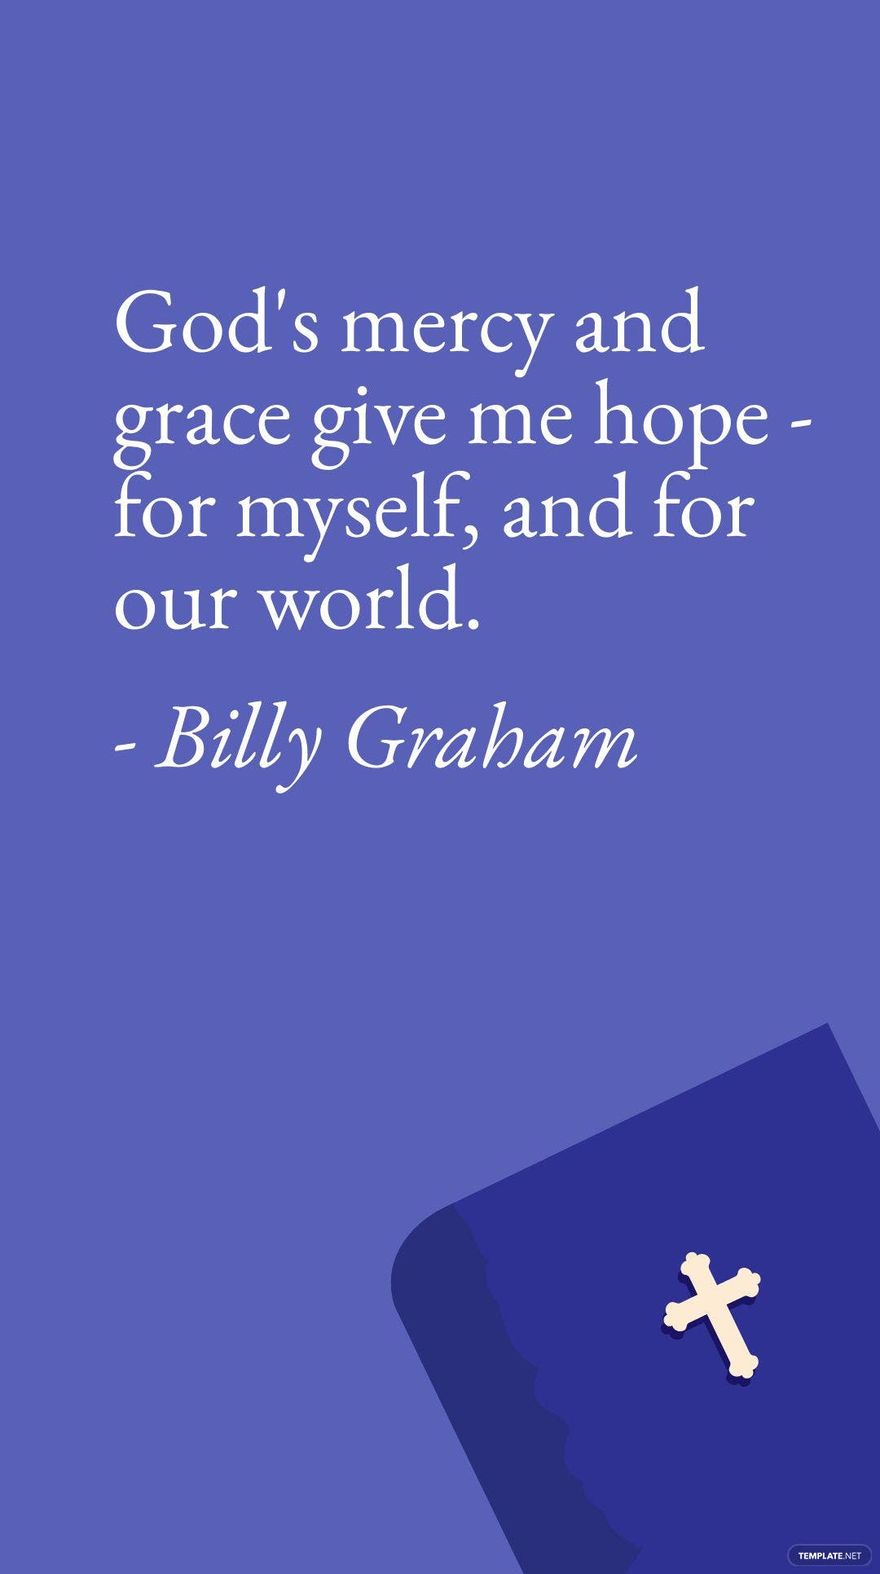 Free Billy Graham - God's mercy and grace give me hope - for myself, and for our world. in JPG